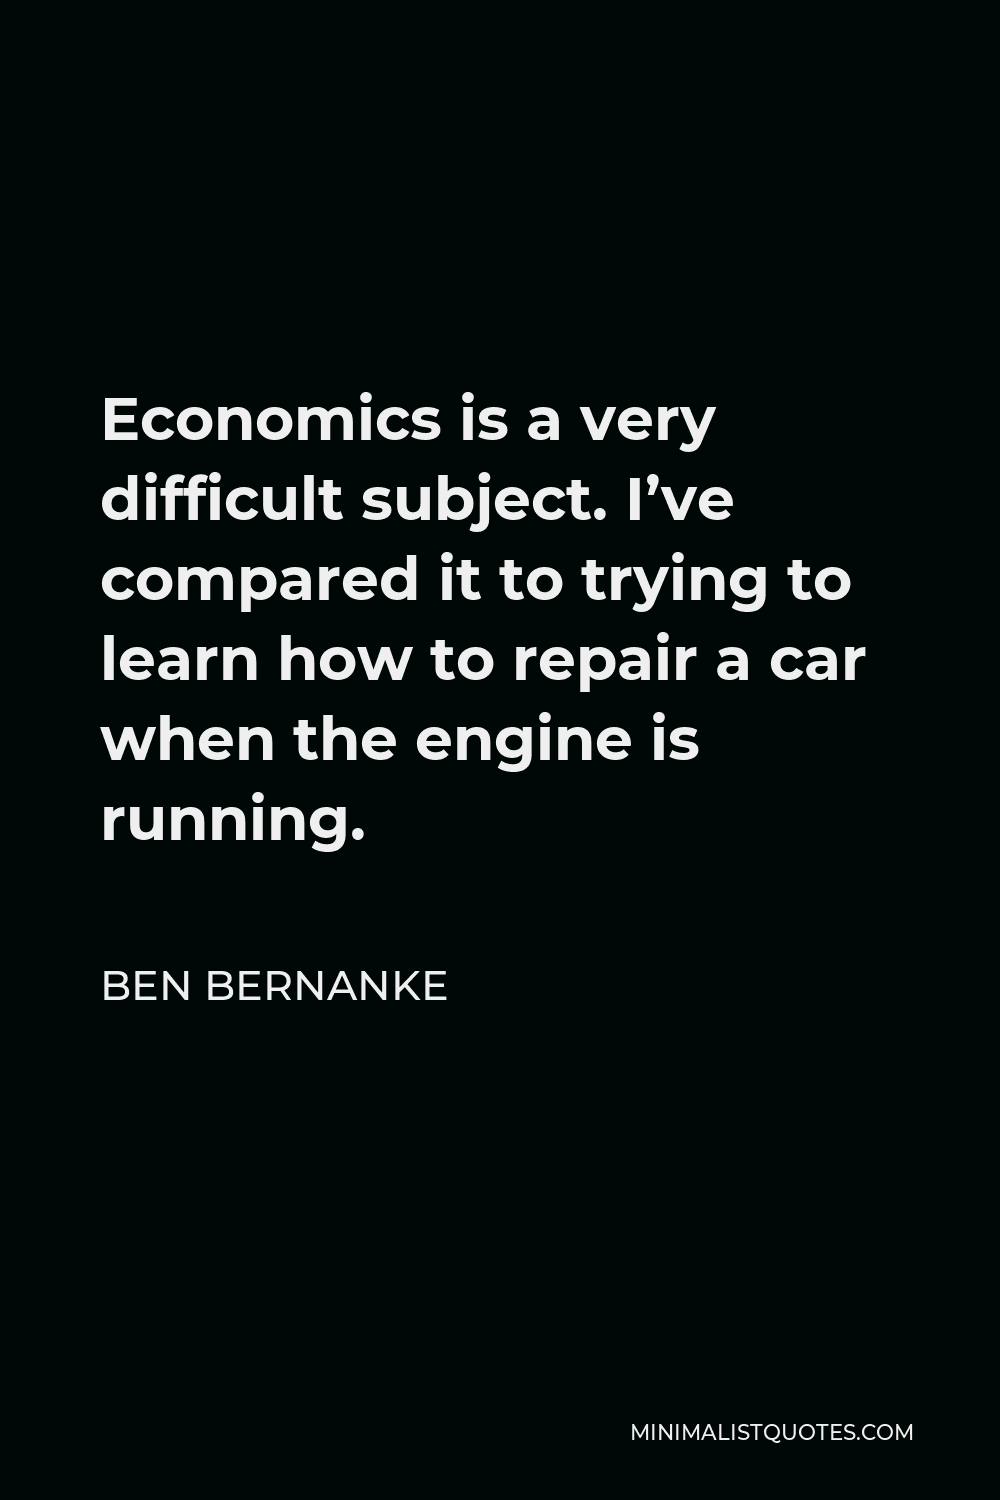 Ben Bernanke Quote - Economics is a very difficult subject. I’ve compared it to trying to learn how to repair a car when the engine is running.